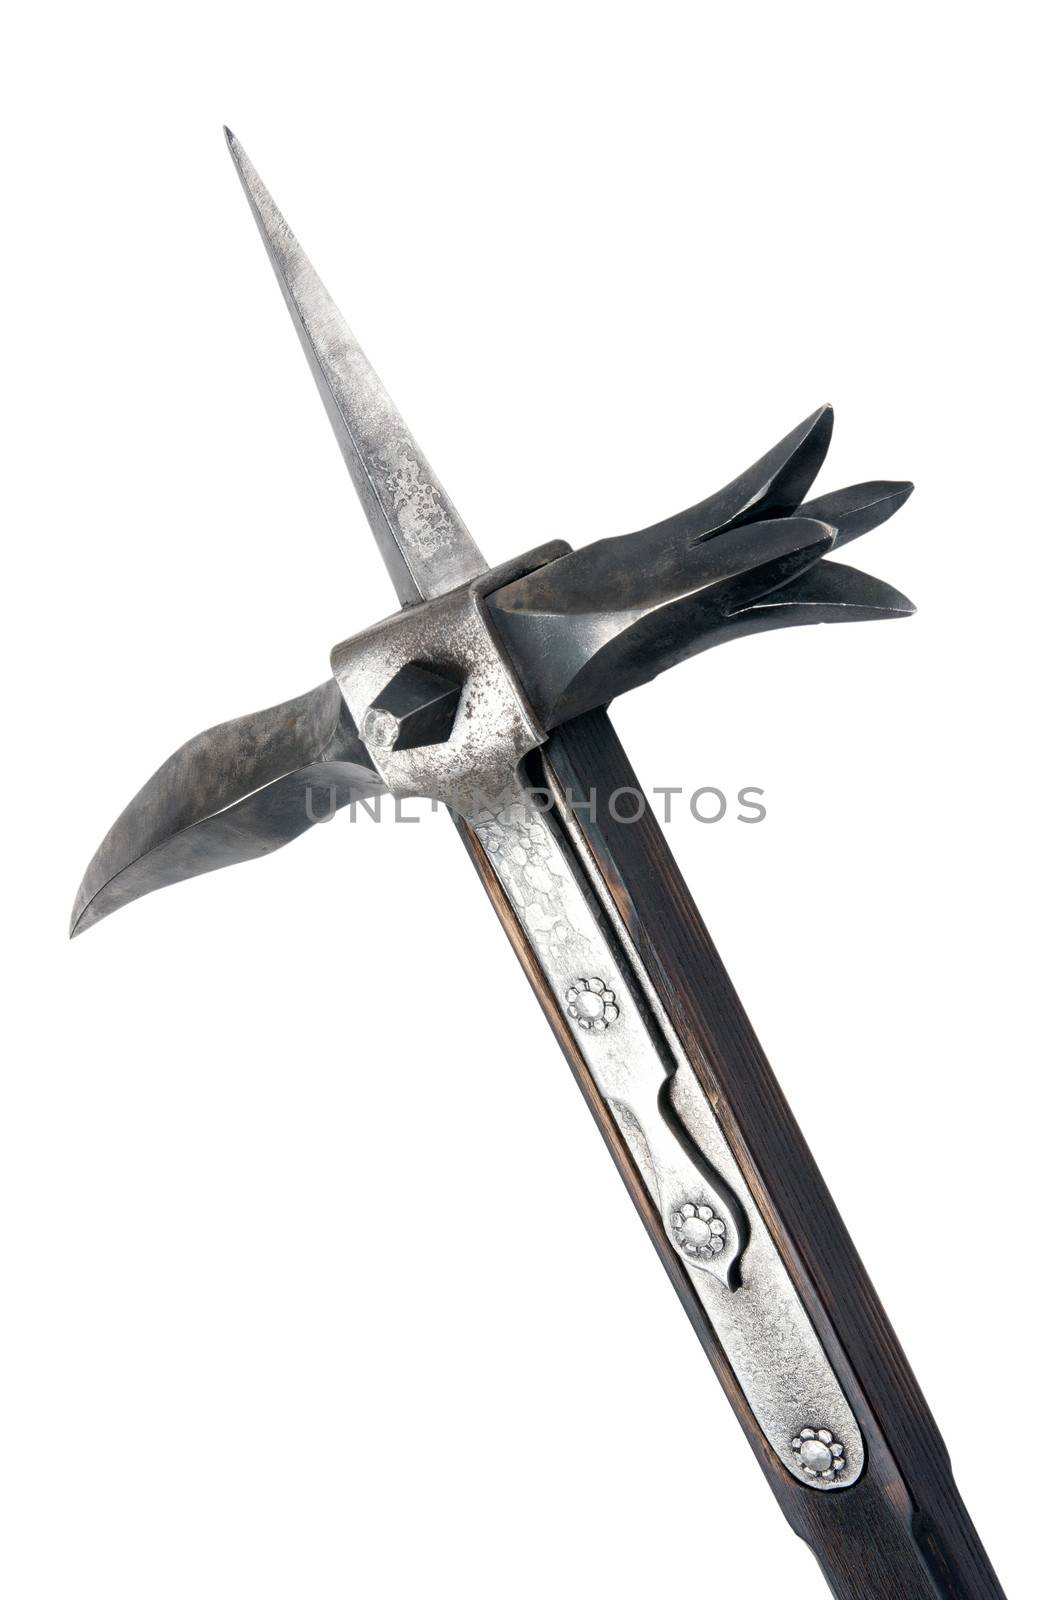 Medieval weapons for close combat. These weapons can pierce light armor knight